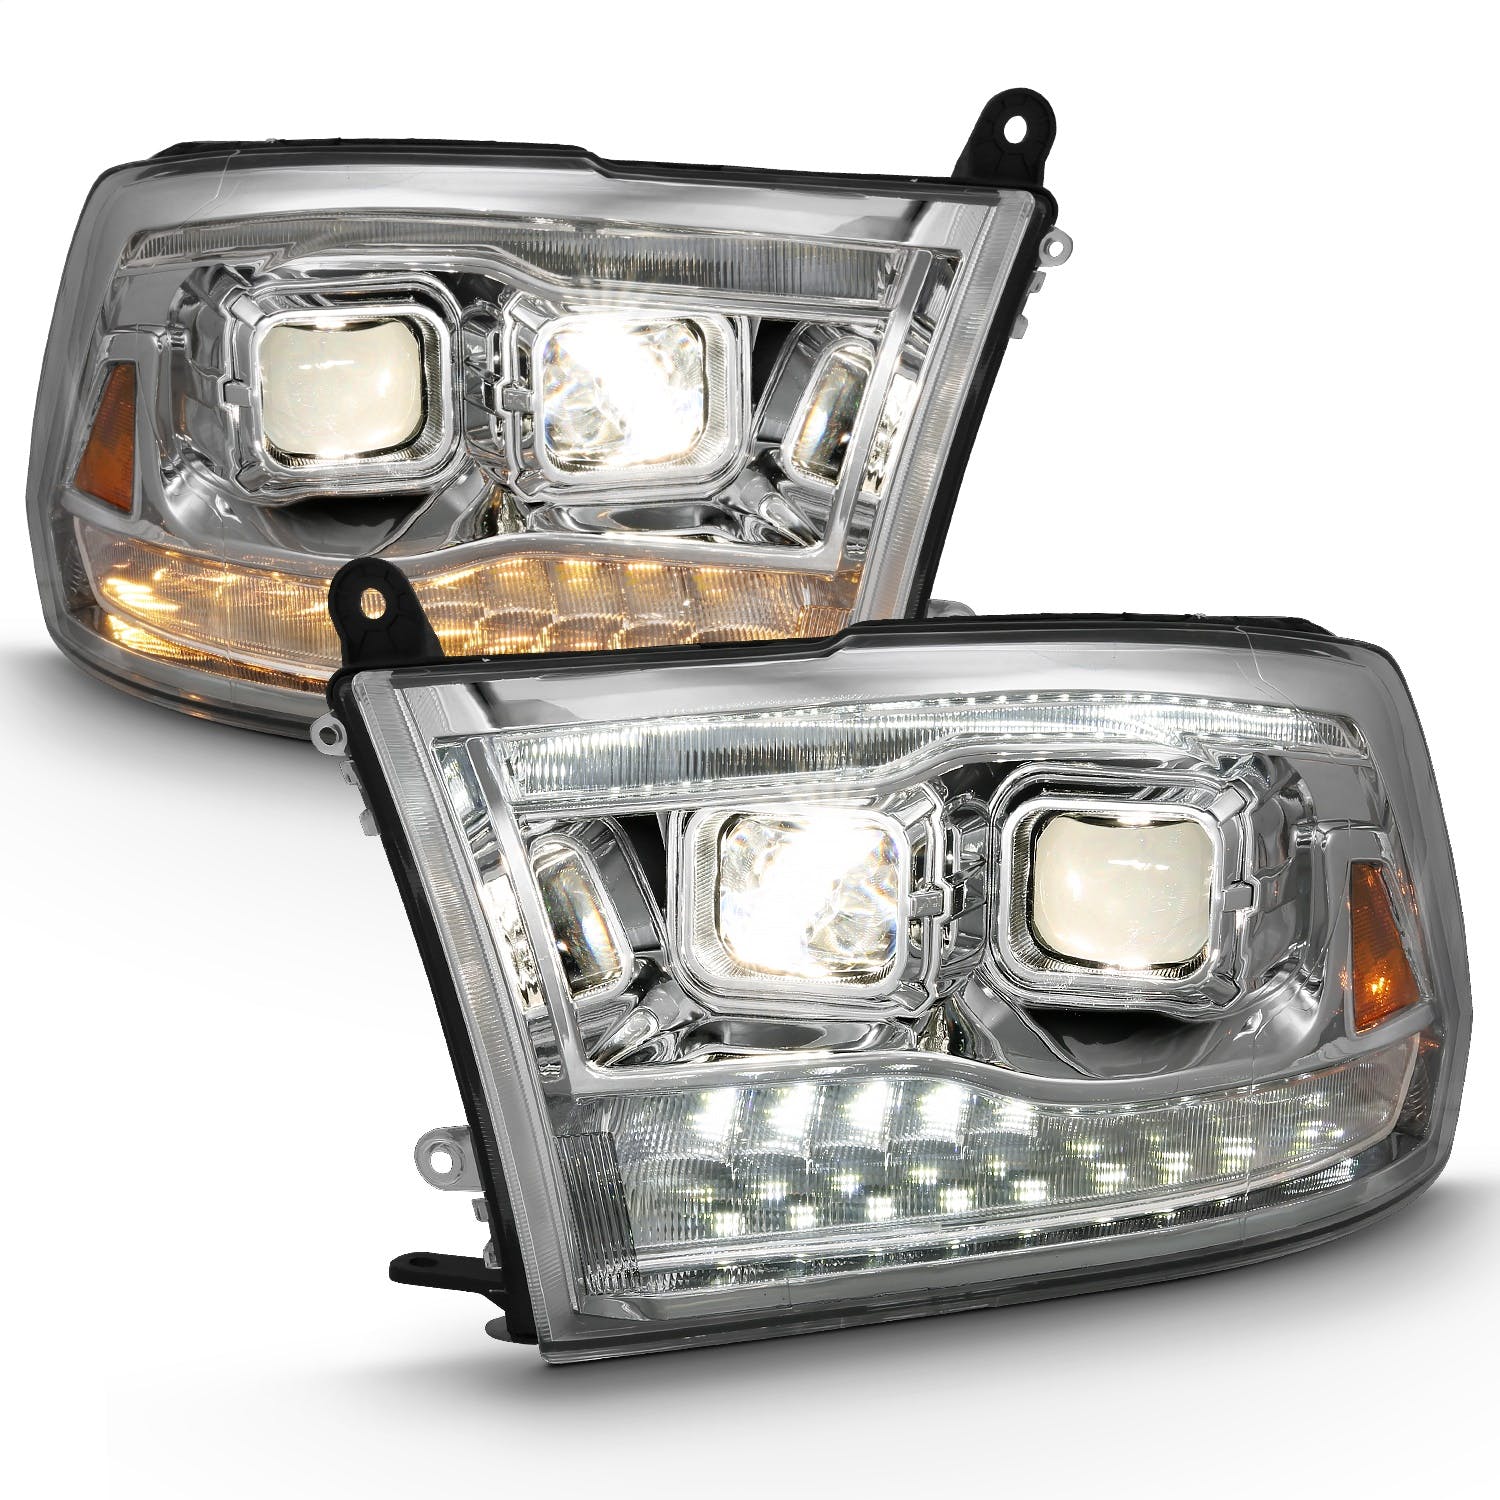 AnzoUSA 111441 Projector Headlights. Switchback Black Amber